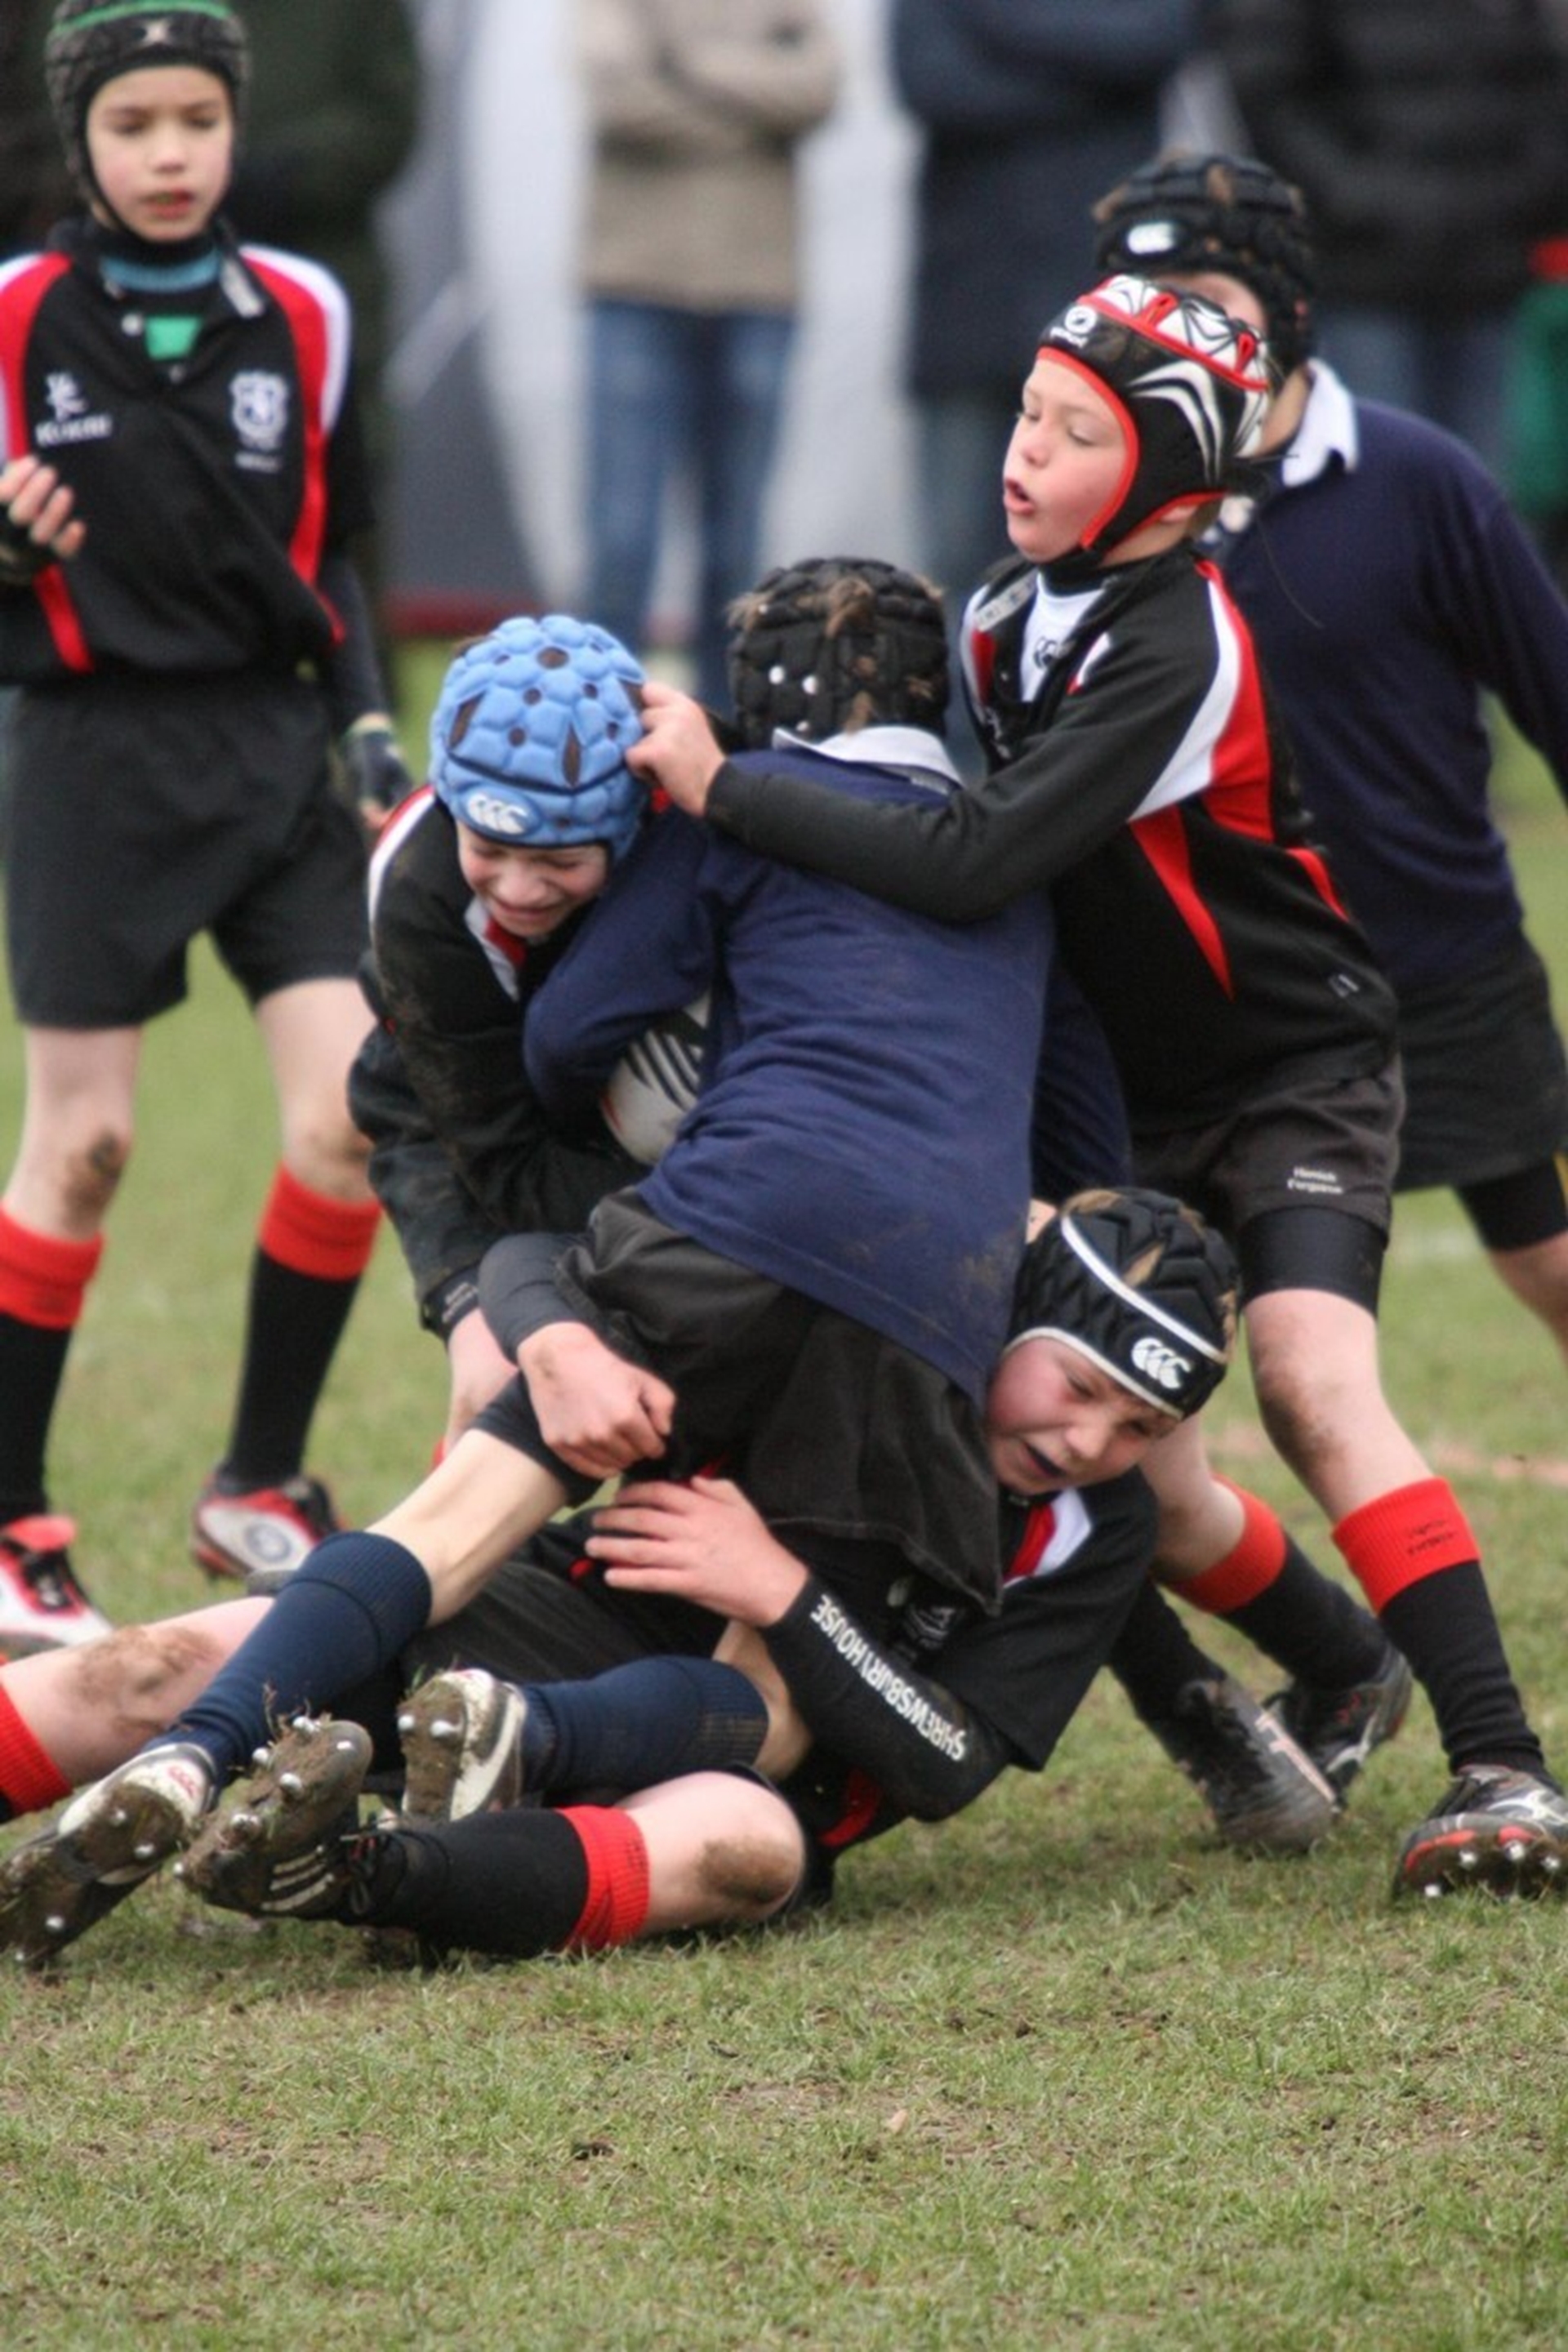 LEXUS KICKS OFF SPONSORSHIP OF THE NATIONAL SCHOOLS RUGBY TOURNAMENT